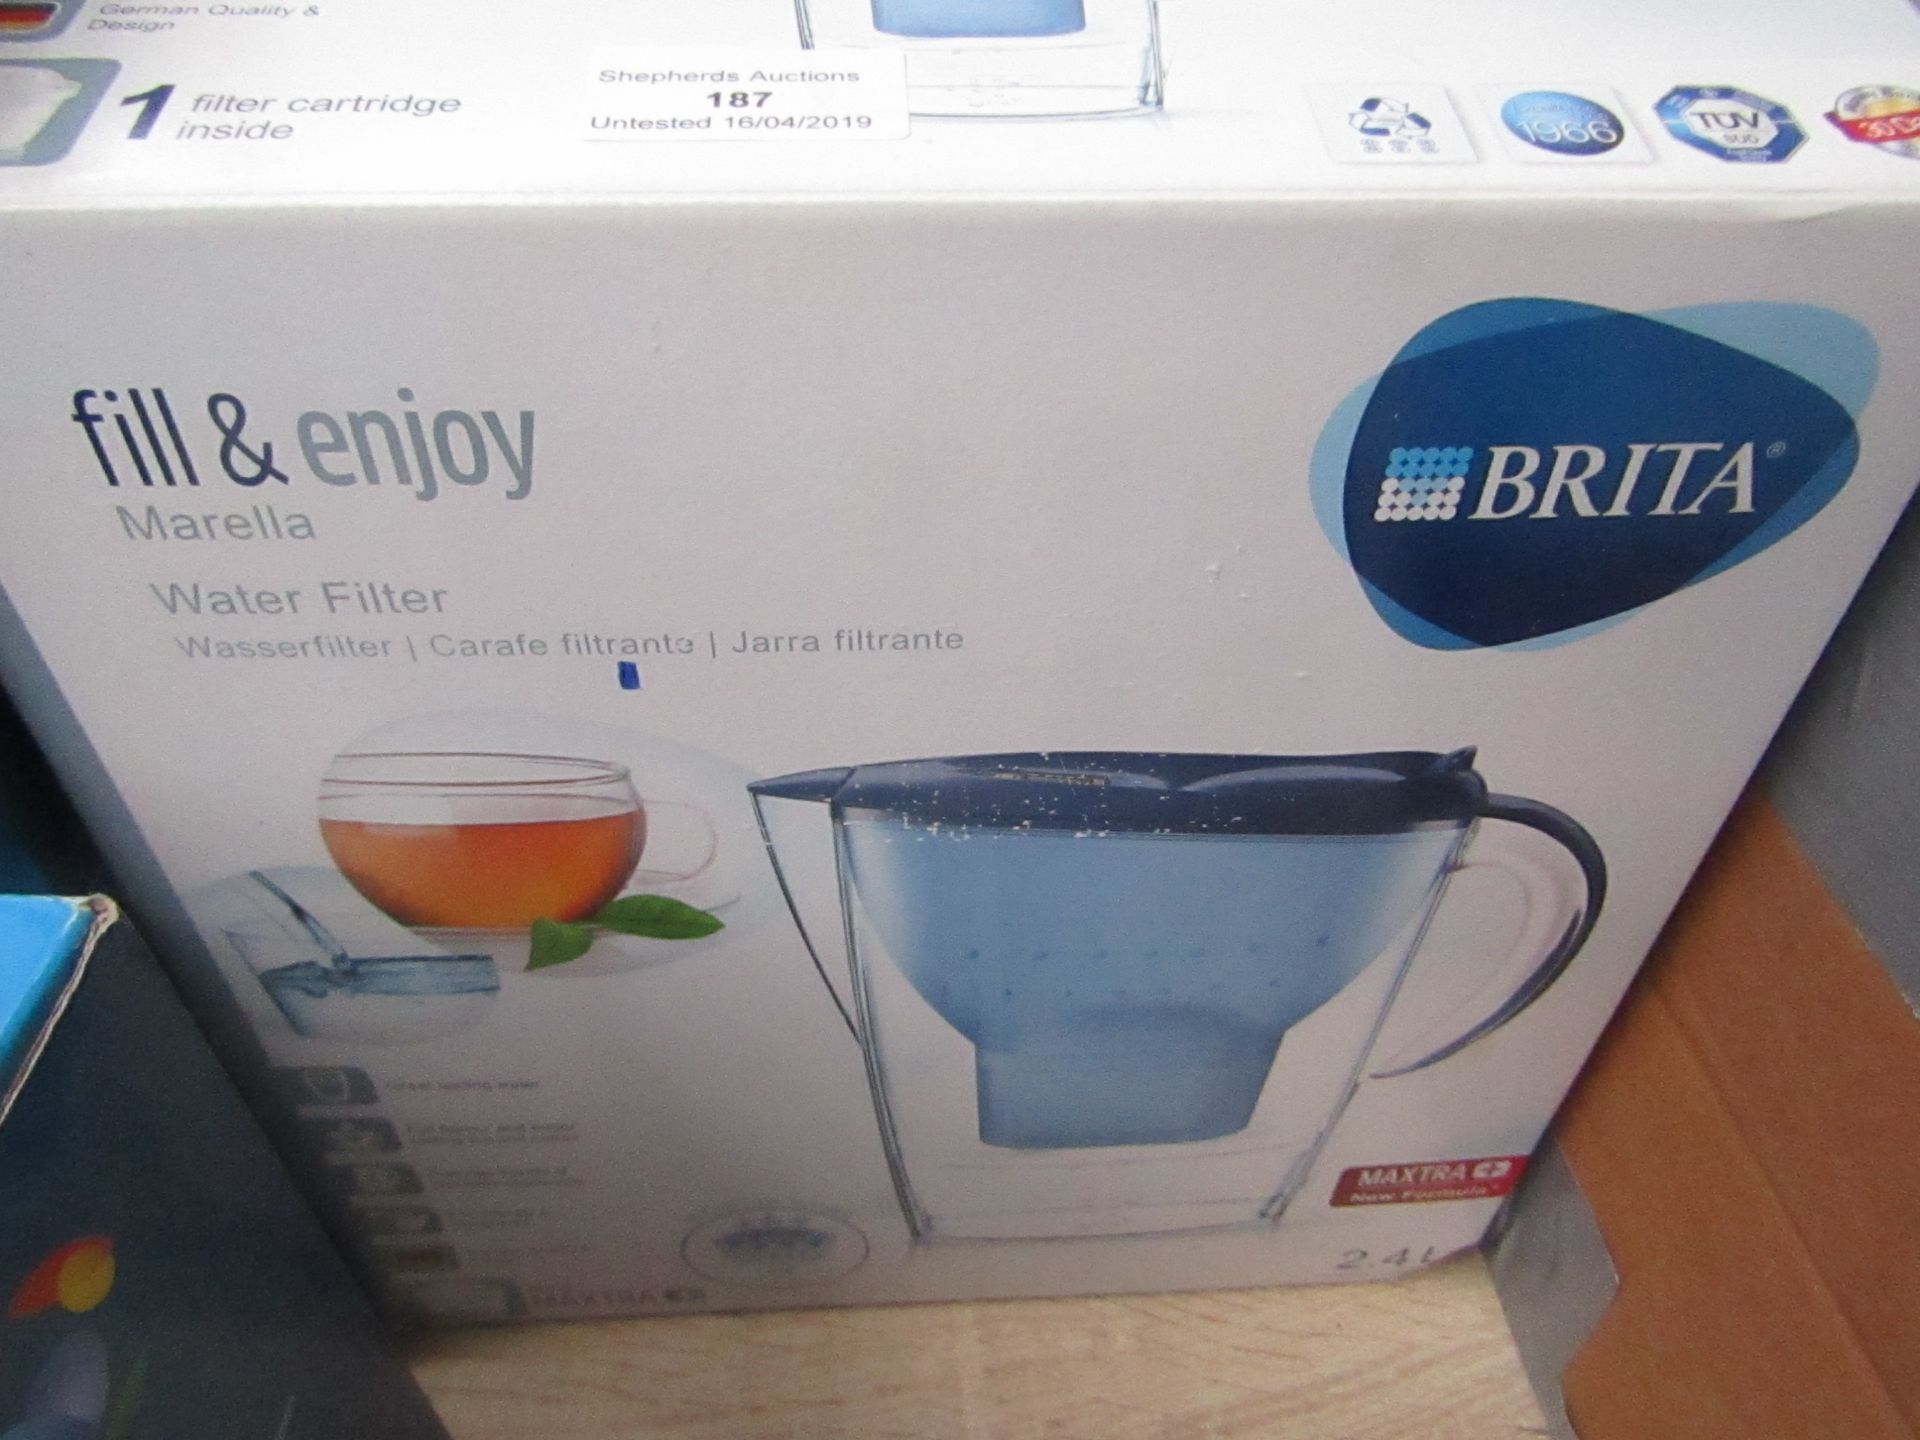 birta water filter untested and boxed